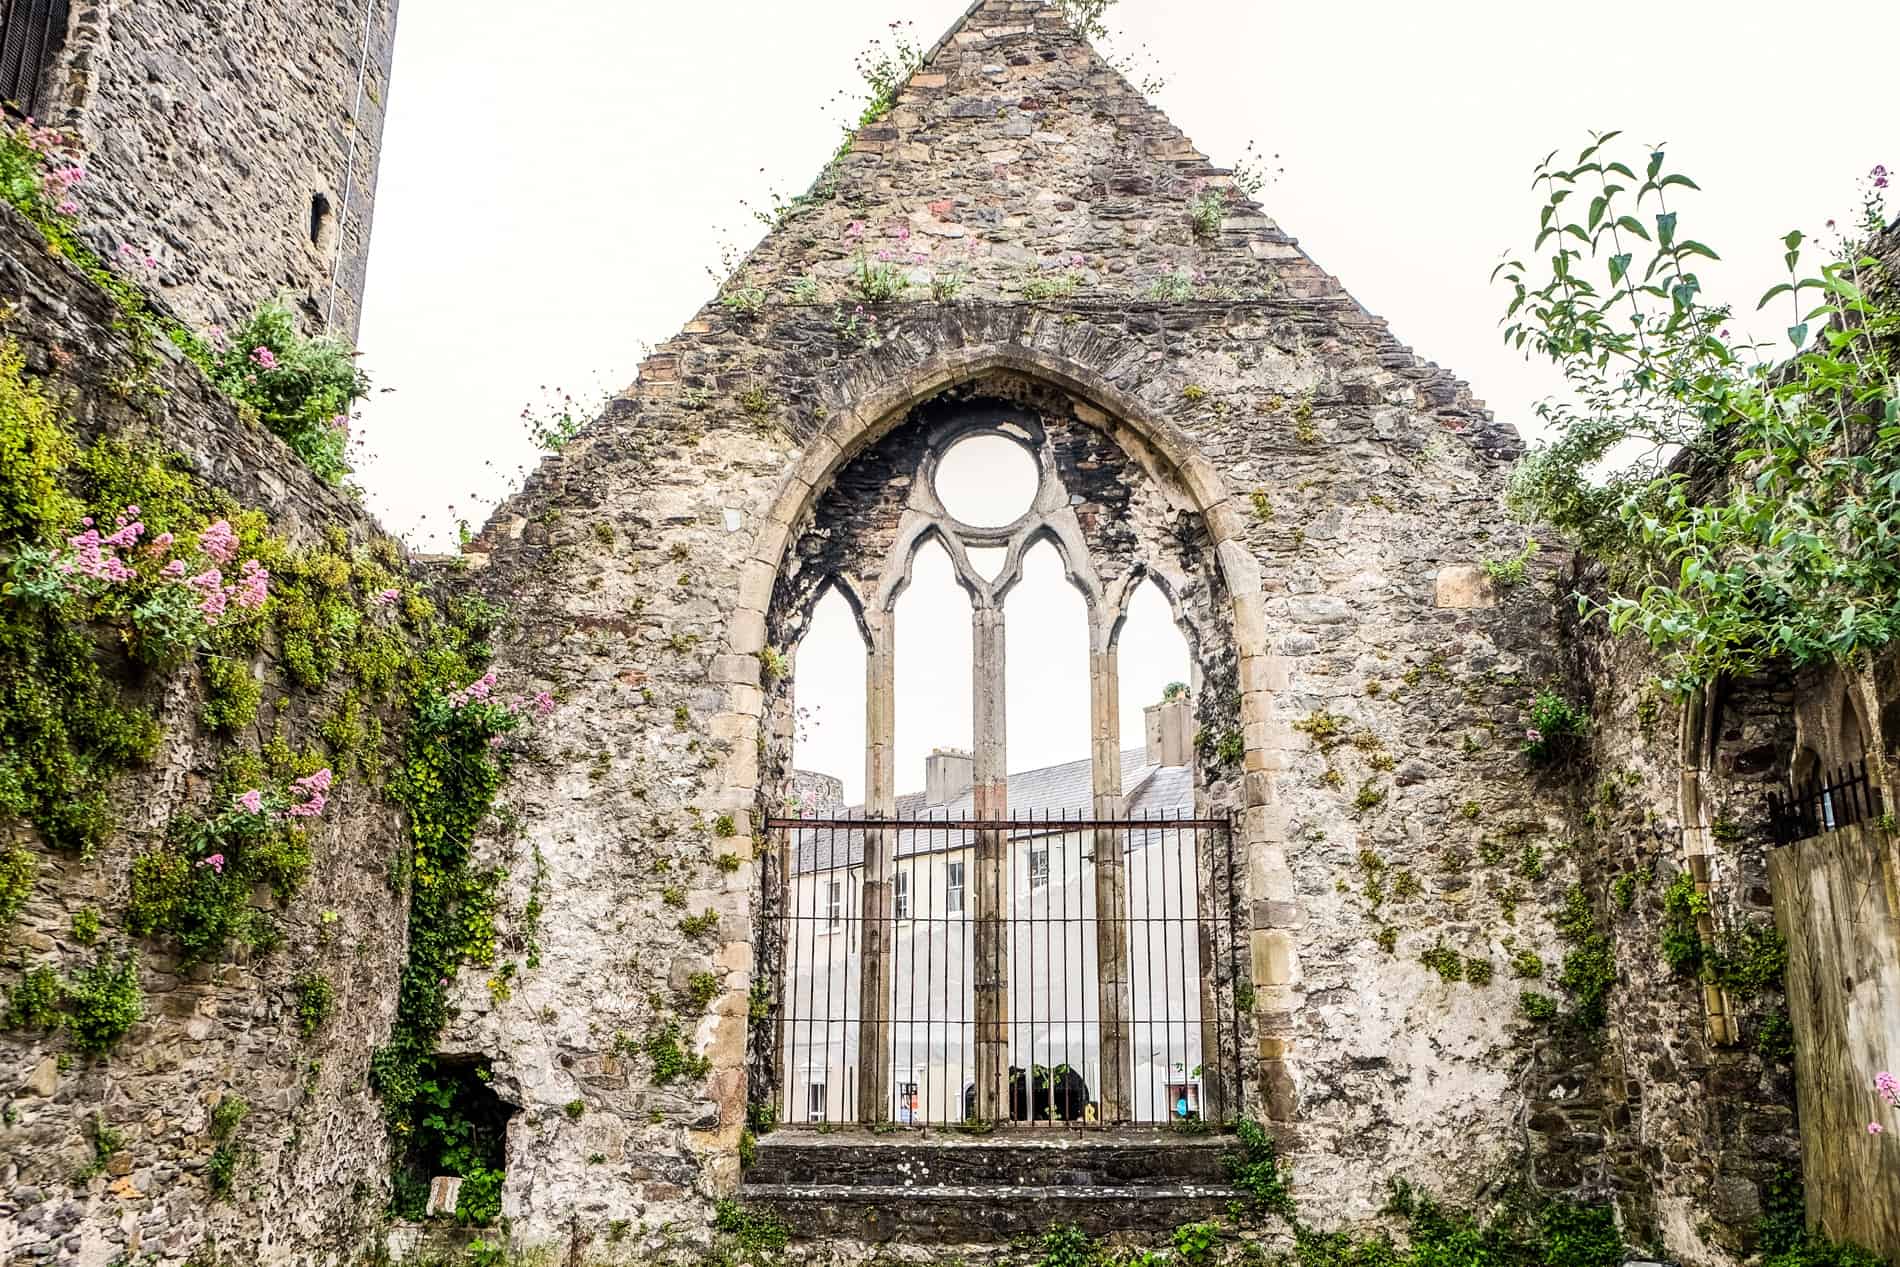 The stone church relic medieval ruins in Waterford, Ireland.